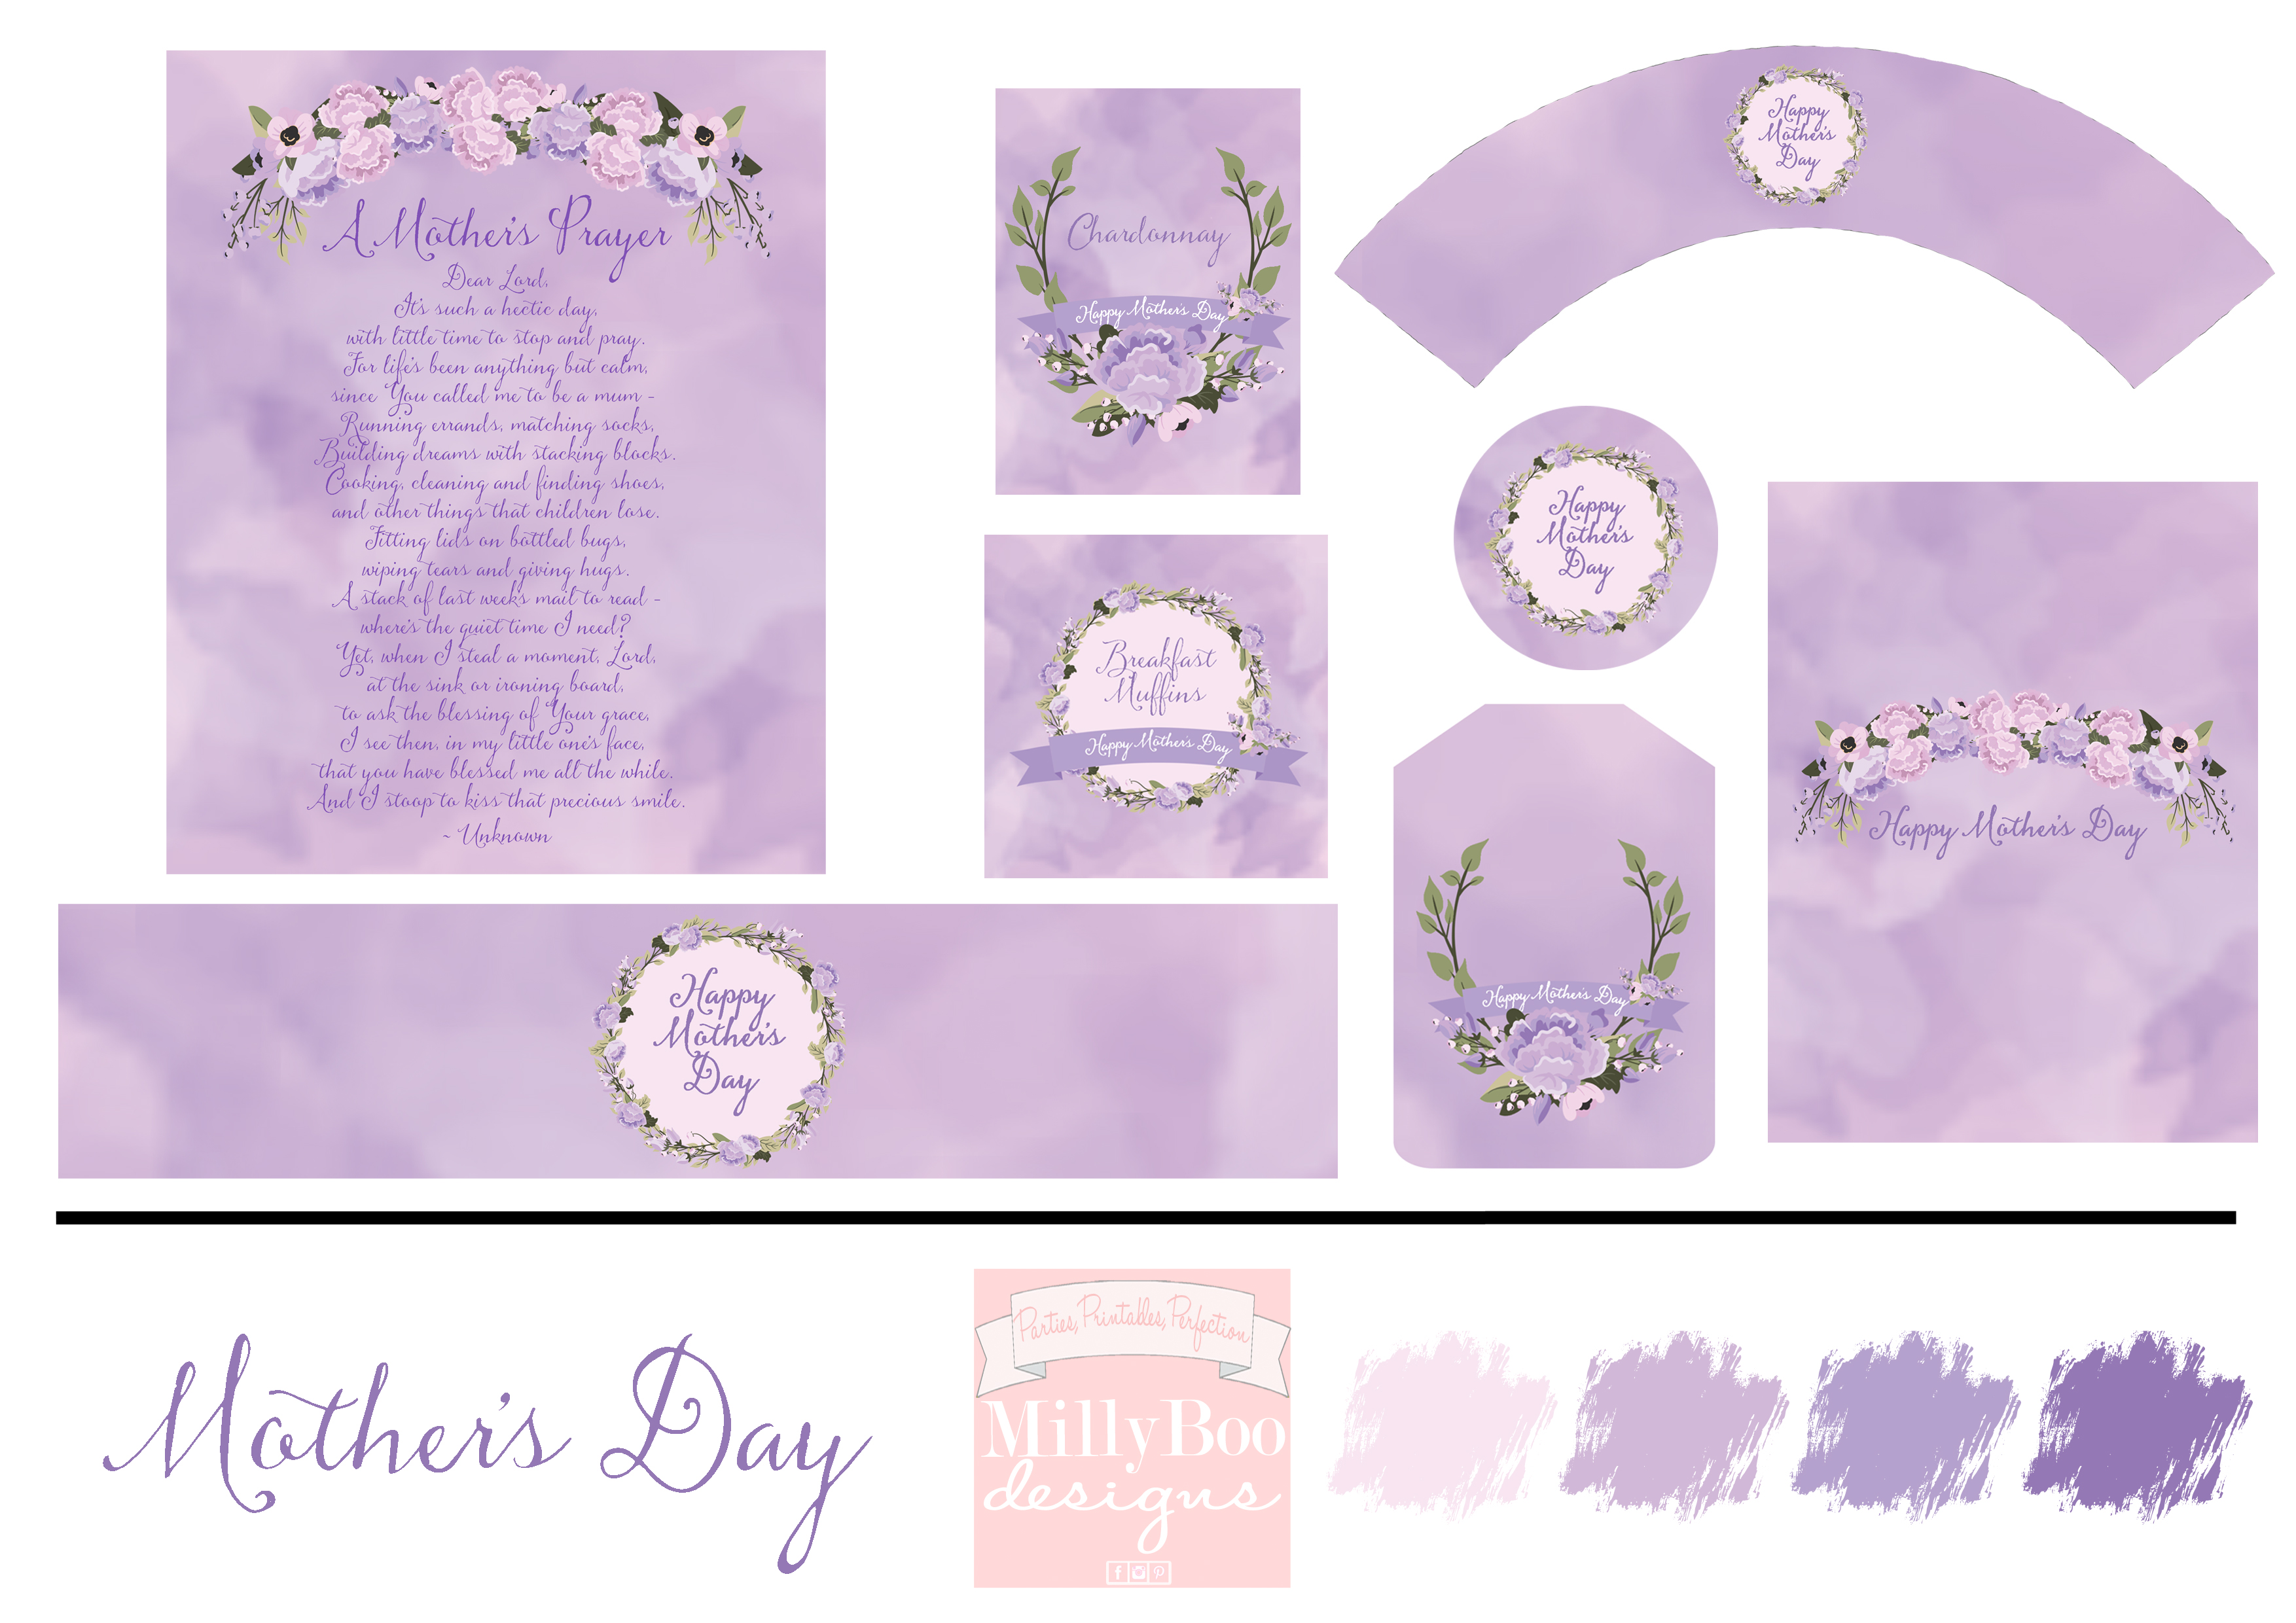 Mother's Day printables - MillyBoo Designs